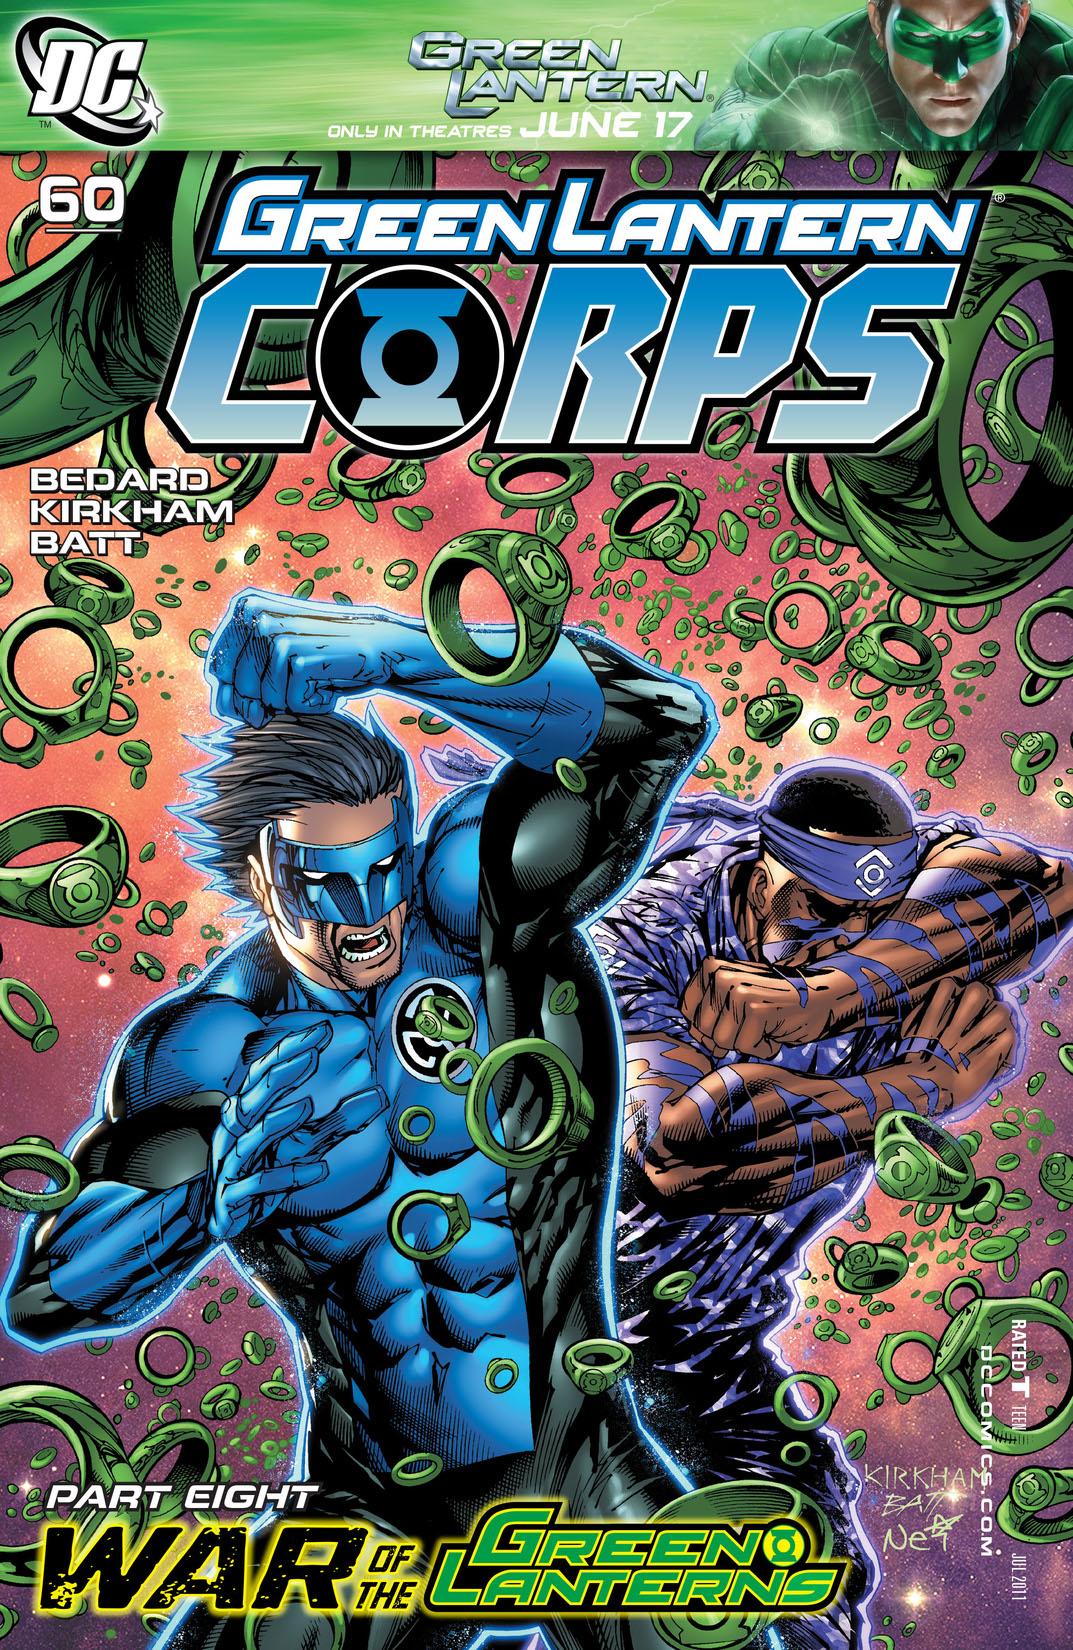 Green Lantern Corps (2006-) #60 preview images